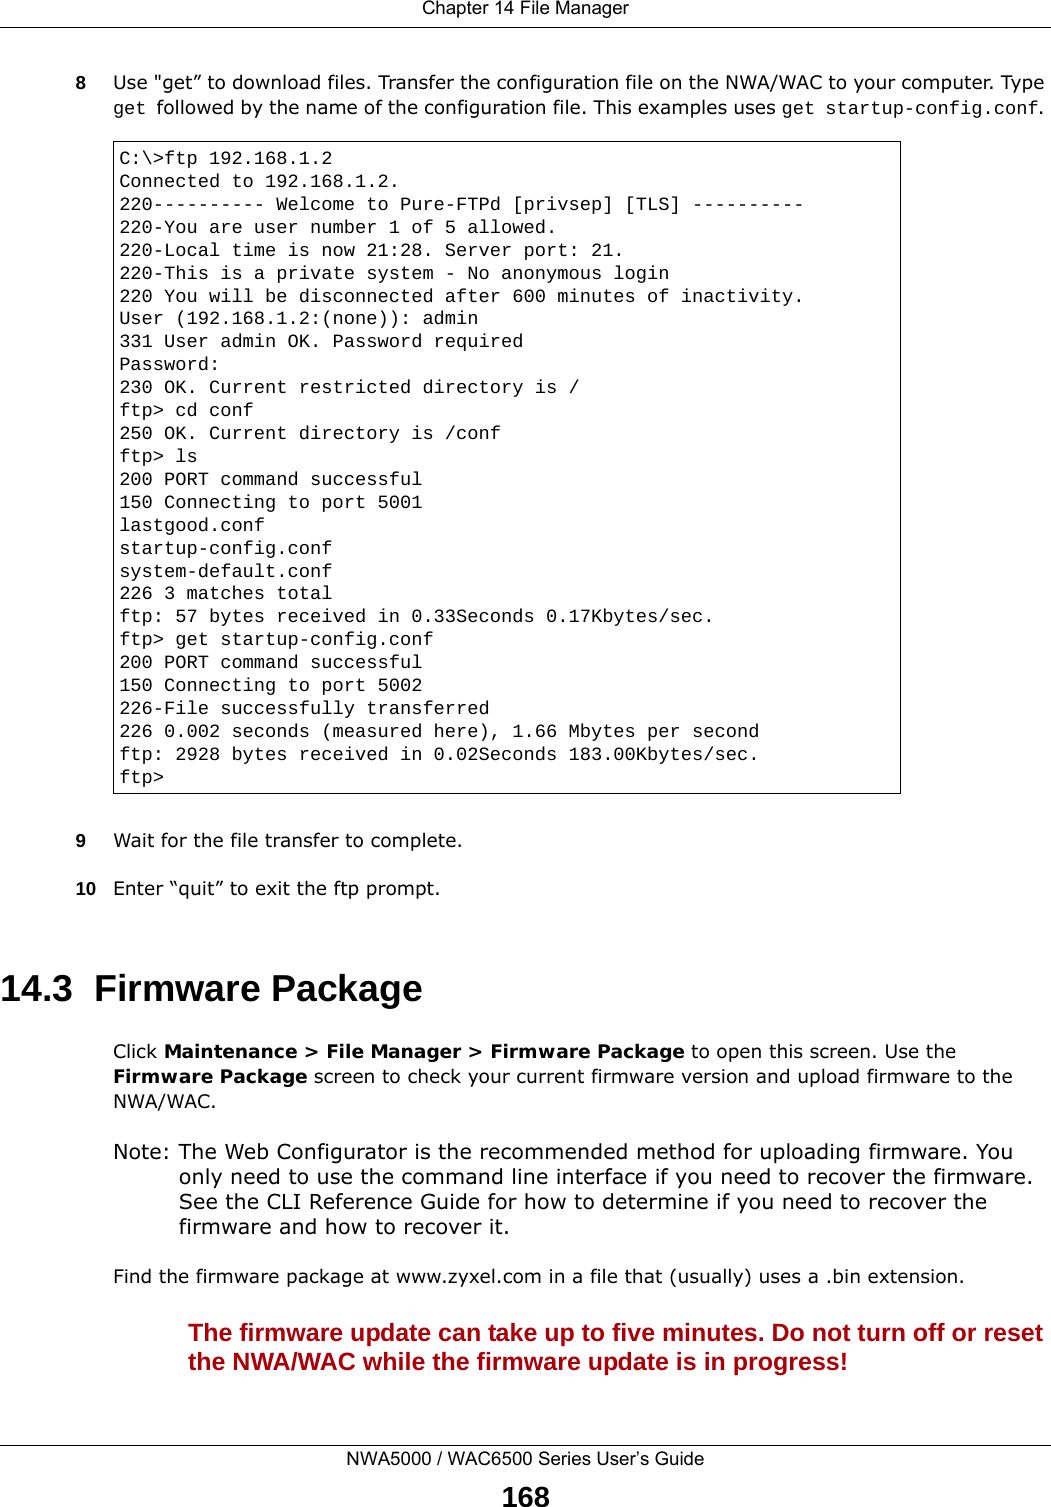 Chapter 14 File ManagerNWA5000 / WAC6500 Series User’s Guide1688Use &quot;get” to download files. Transfer the configuration file on the NWA/WAC to your computer. Type get followed by the name of the configuration file. This examples uses get startup-config.conf. 9Wait for the file transfer to complete.10 Enter “quit” to exit the ftp prompt.14.3  Firmware Package Click Maintenance &gt; File Manager &gt; Firmware Package to open this screen. Use the Firmware Package screen to check your current firmware version and upload firmware to the NWA/WAC.Note: The Web Configurator is the recommended method for uploading firmware. You only need to use the command line interface if you need to recover the firmware. See the CLI Reference Guide for how to determine if you need to recover the firmware and how to recover it.Find the firmware package at www.zyxel.com in a file that (usually) uses a .bin extension. The firmware update can take up to five minutes. Do not turn off or reset the NWA/WAC while the firmware update is in progress!C:\&gt;ftp 192.168.1.2Connected to 192.168.1.2.220---------- Welcome to Pure-FTPd [privsep] [TLS] ----------220-You are user number 1 of 5 allowed.220-Local time is now 21:28. Server port: 21.220-This is a private system - No anonymous login220 You will be disconnected after 600 minutes of inactivity.User (192.168.1.2:(none)): admin331 User admin OK. Password requiredPassword:230 OK. Current restricted directory is /ftp&gt; cd conf250 OK. Current directory is /confftp&gt; ls200 PORT command successful150 Connecting to port 5001lastgood.confstartup-config.confsystem-default.conf226 3 matches totalftp: 57 bytes received in 0.33Seconds 0.17Kbytes/sec.ftp&gt; get startup-config.conf200 PORT command successful150 Connecting to port 5002226-File successfully transferred226 0.002 seconds (measured here), 1.66 Mbytes per secondftp: 2928 bytes received in 0.02Seconds 183.00Kbytes/sec.ftp&gt;